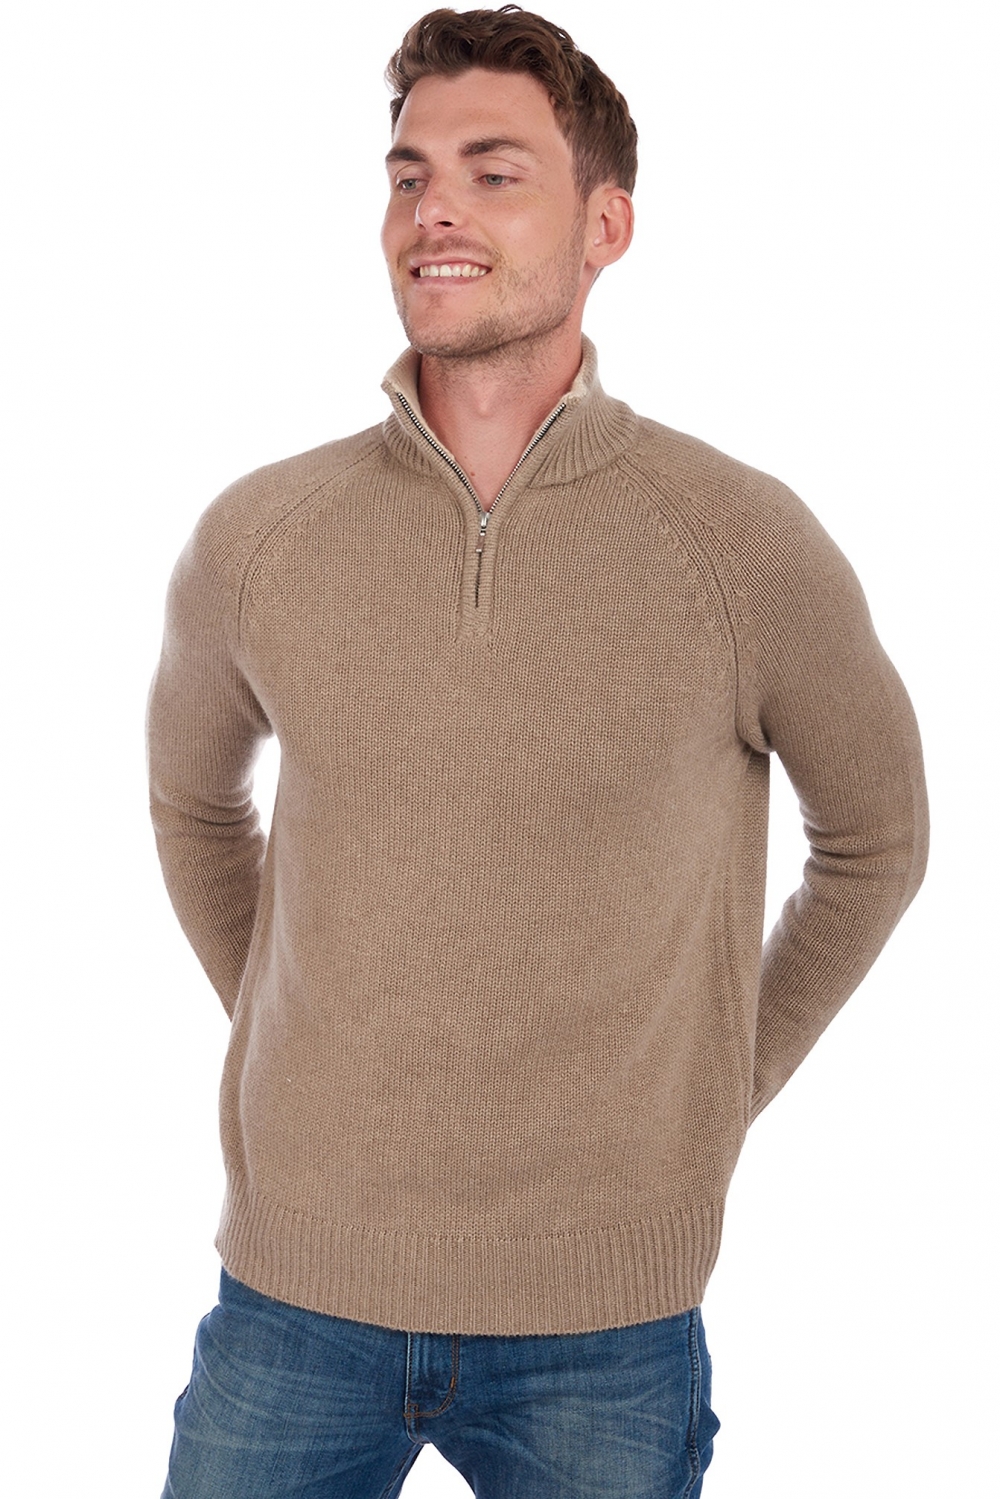 Cachemire pull homme angers natural brown natural beige 4xl